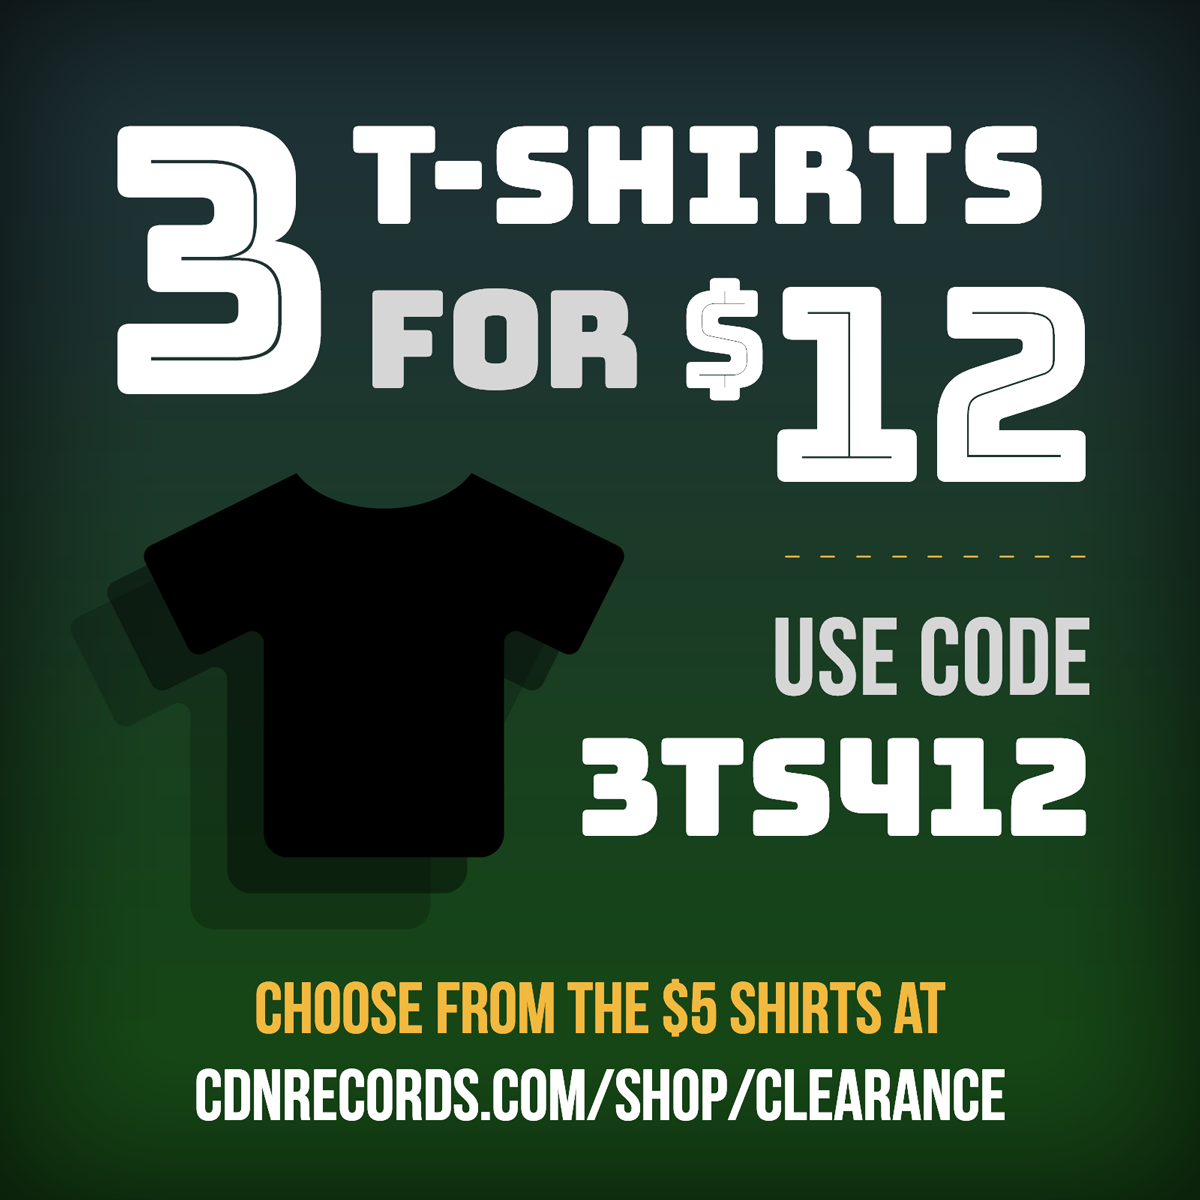 3 t-shirts for $12 CAD promo graphic